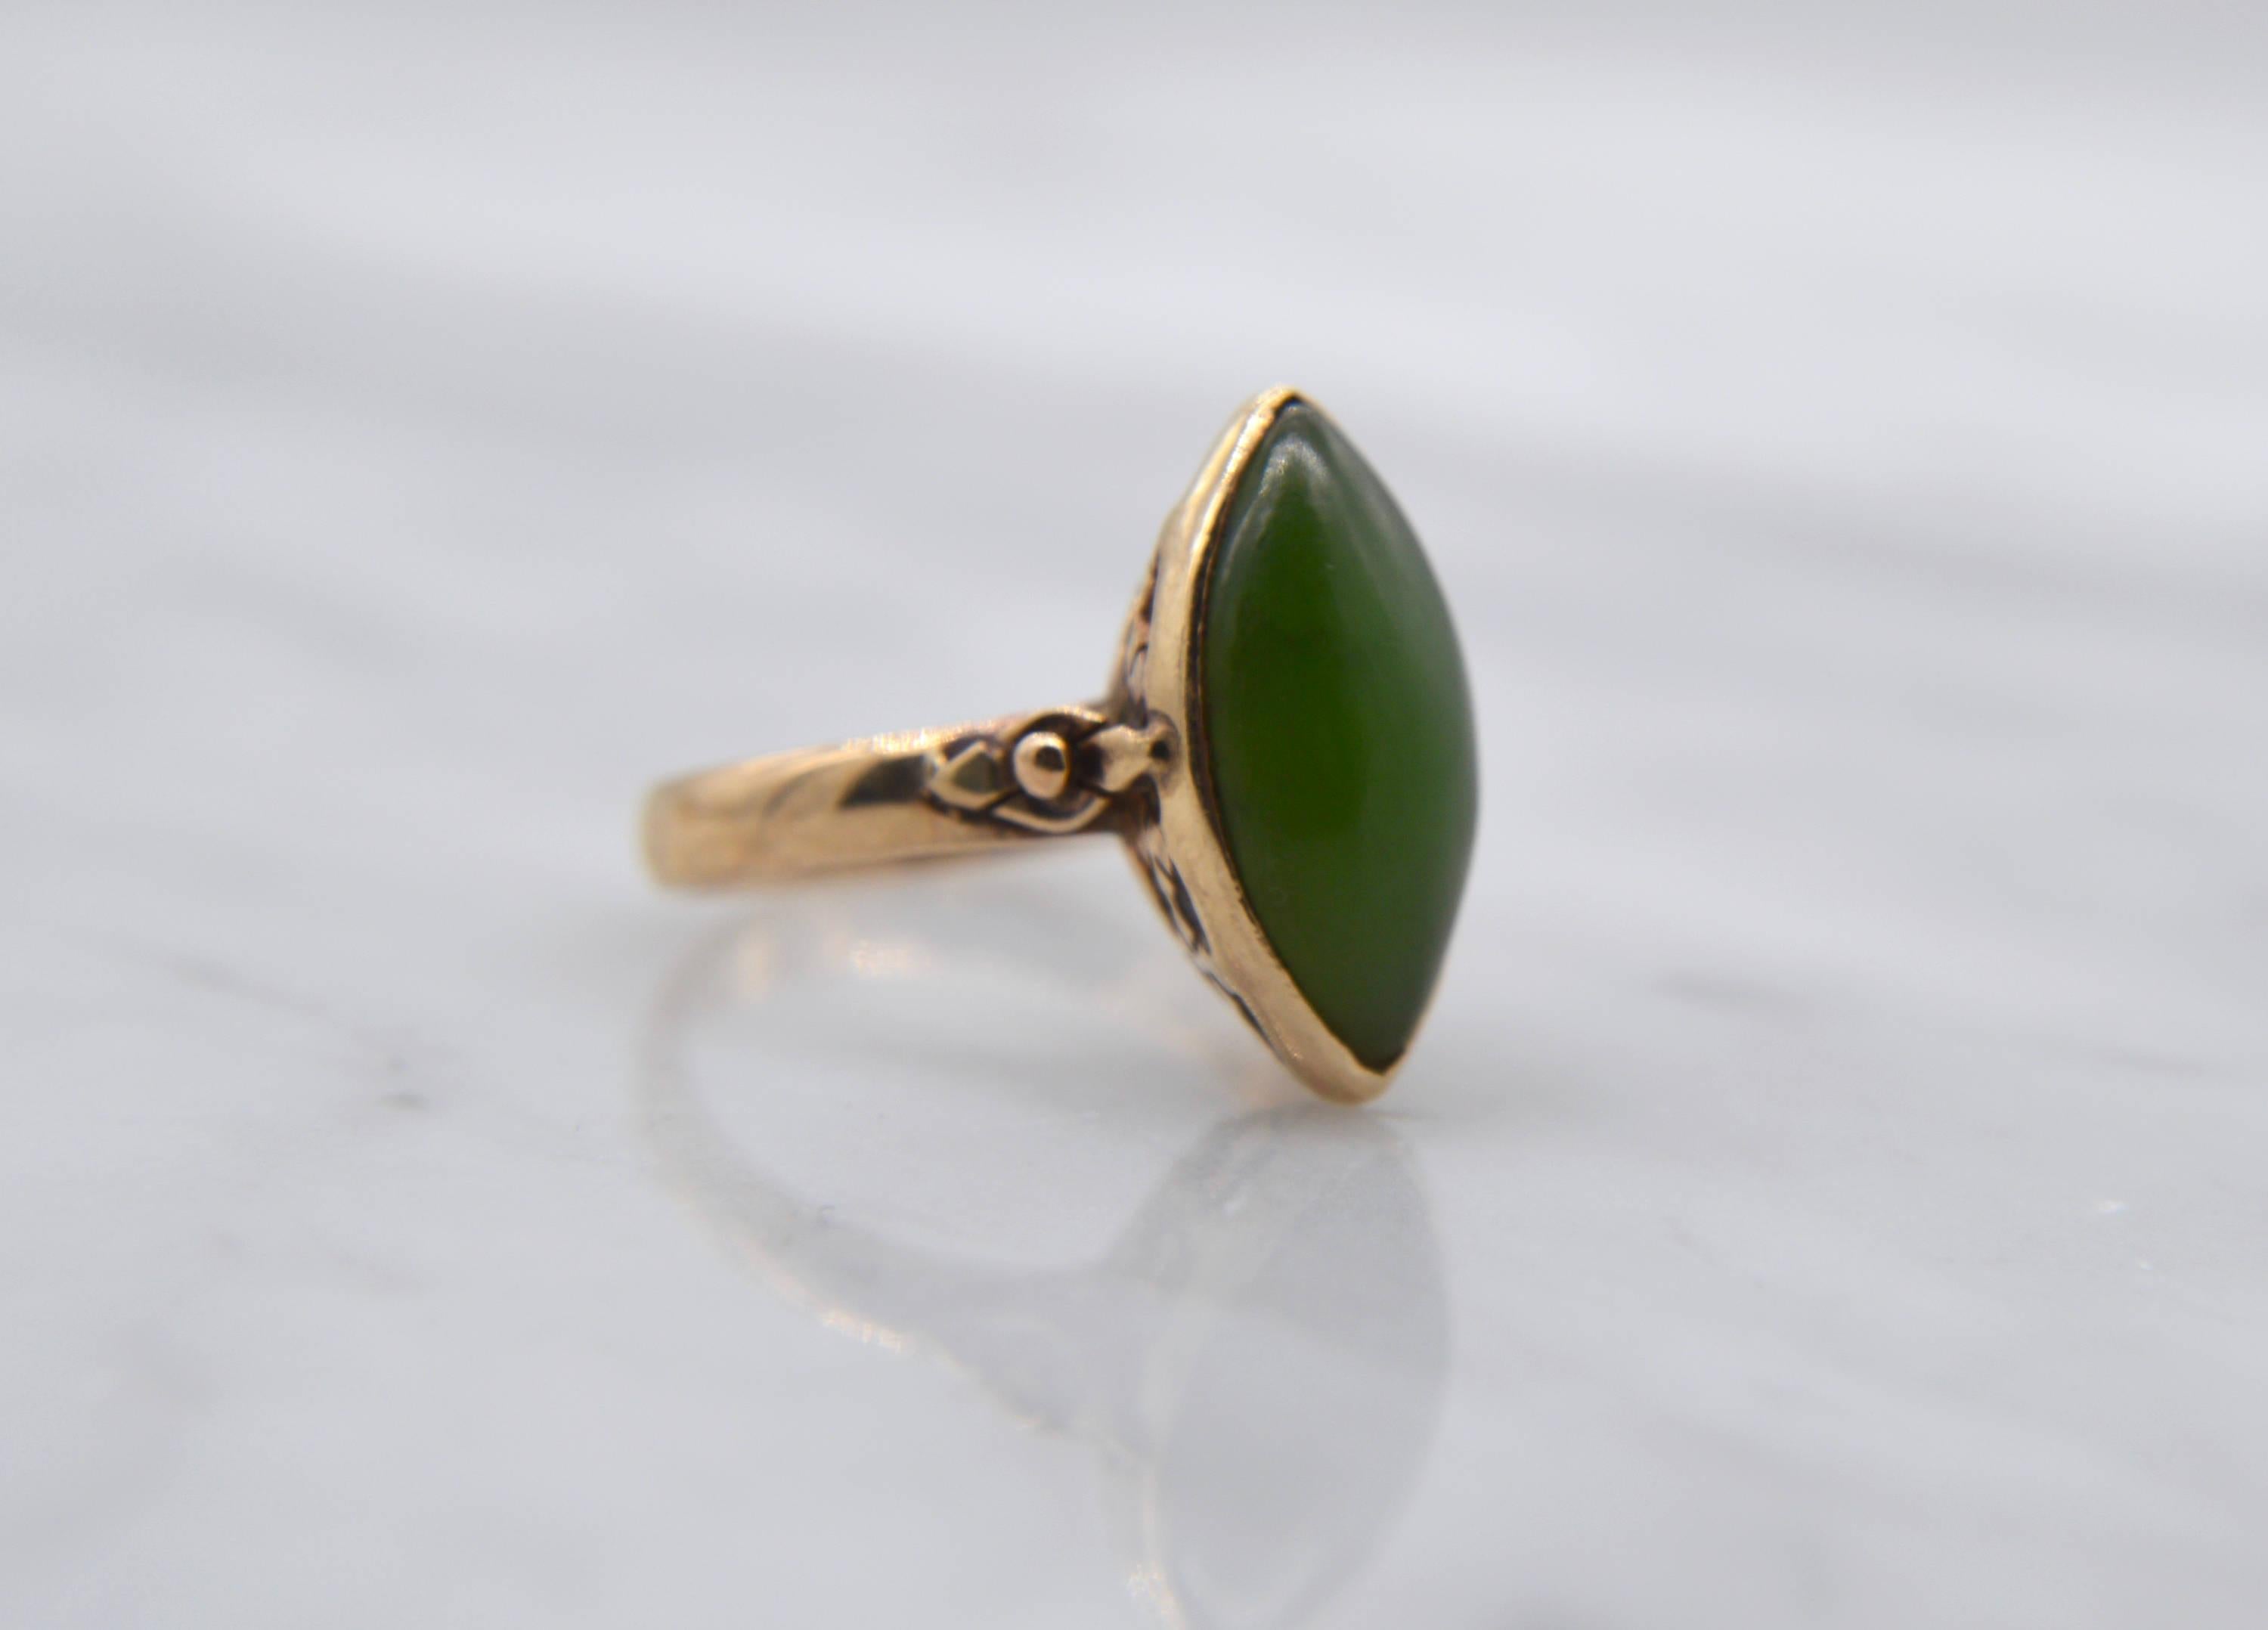 Beautiful Art Deco antique circa 1920s natural nephrite jade 14K yellow gold marquise cabochon ring. Mesmerizing shade of deep mossy green. In very good condition. Size 6, can be resized by a jeweler. Marked and tested as solid 14K. Cabochon